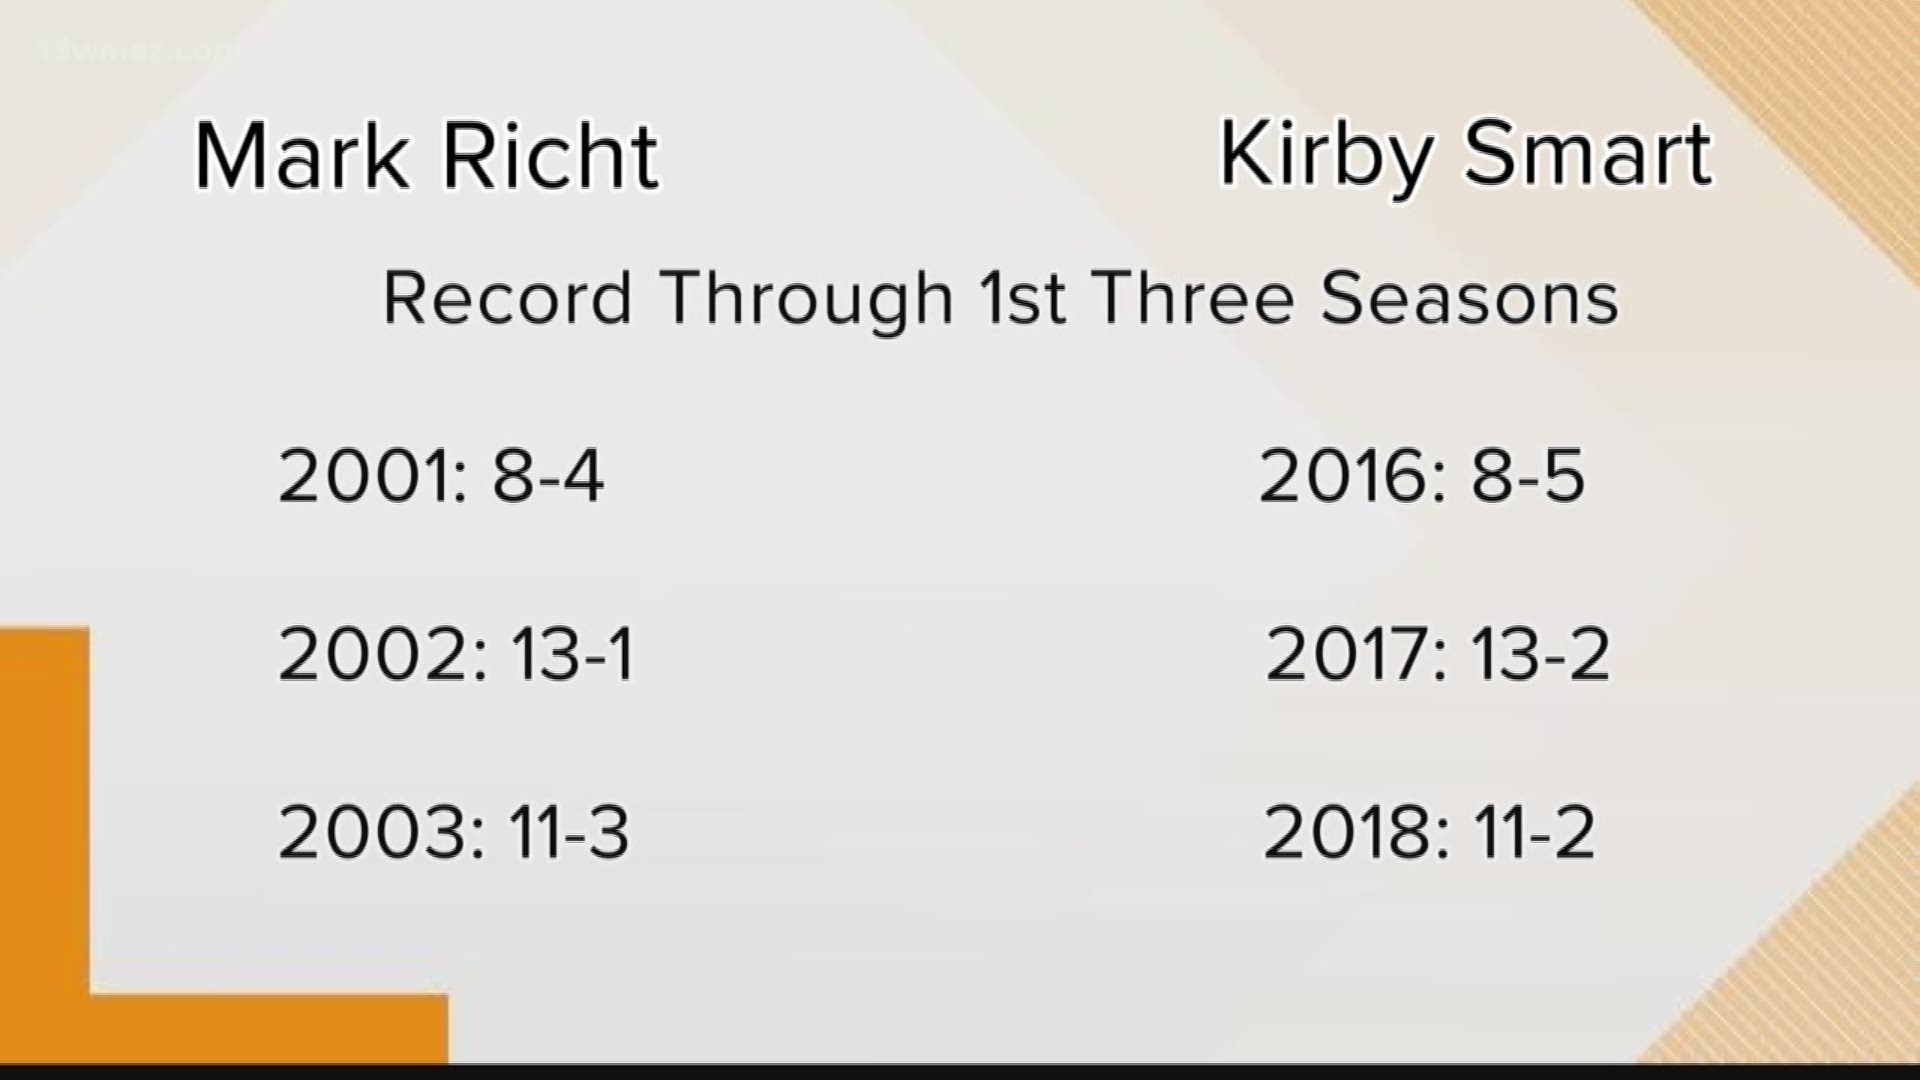 We're comparing the similarities between UGA head football coach Kirby Smart's first three years former head coach Mark Richt's first few years.